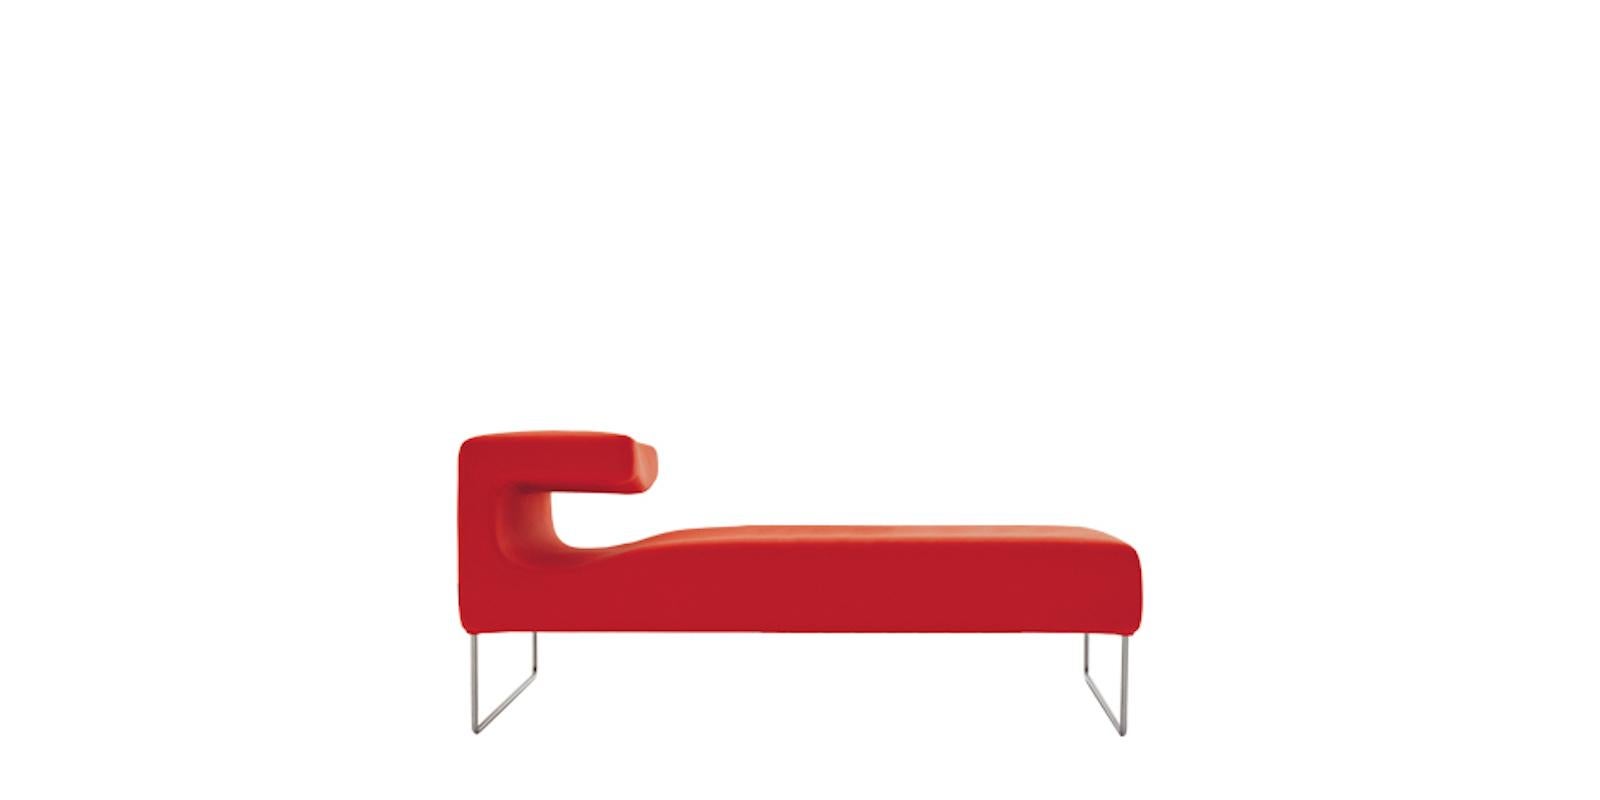 Moroso Lowseat chaise longue in red fabric by Patricia Urquiola. Alternative colors are available as well. 

A chair, a chaise longue and a corner element form an extremely versatile modular seating system. Freestanding, independent, seats which